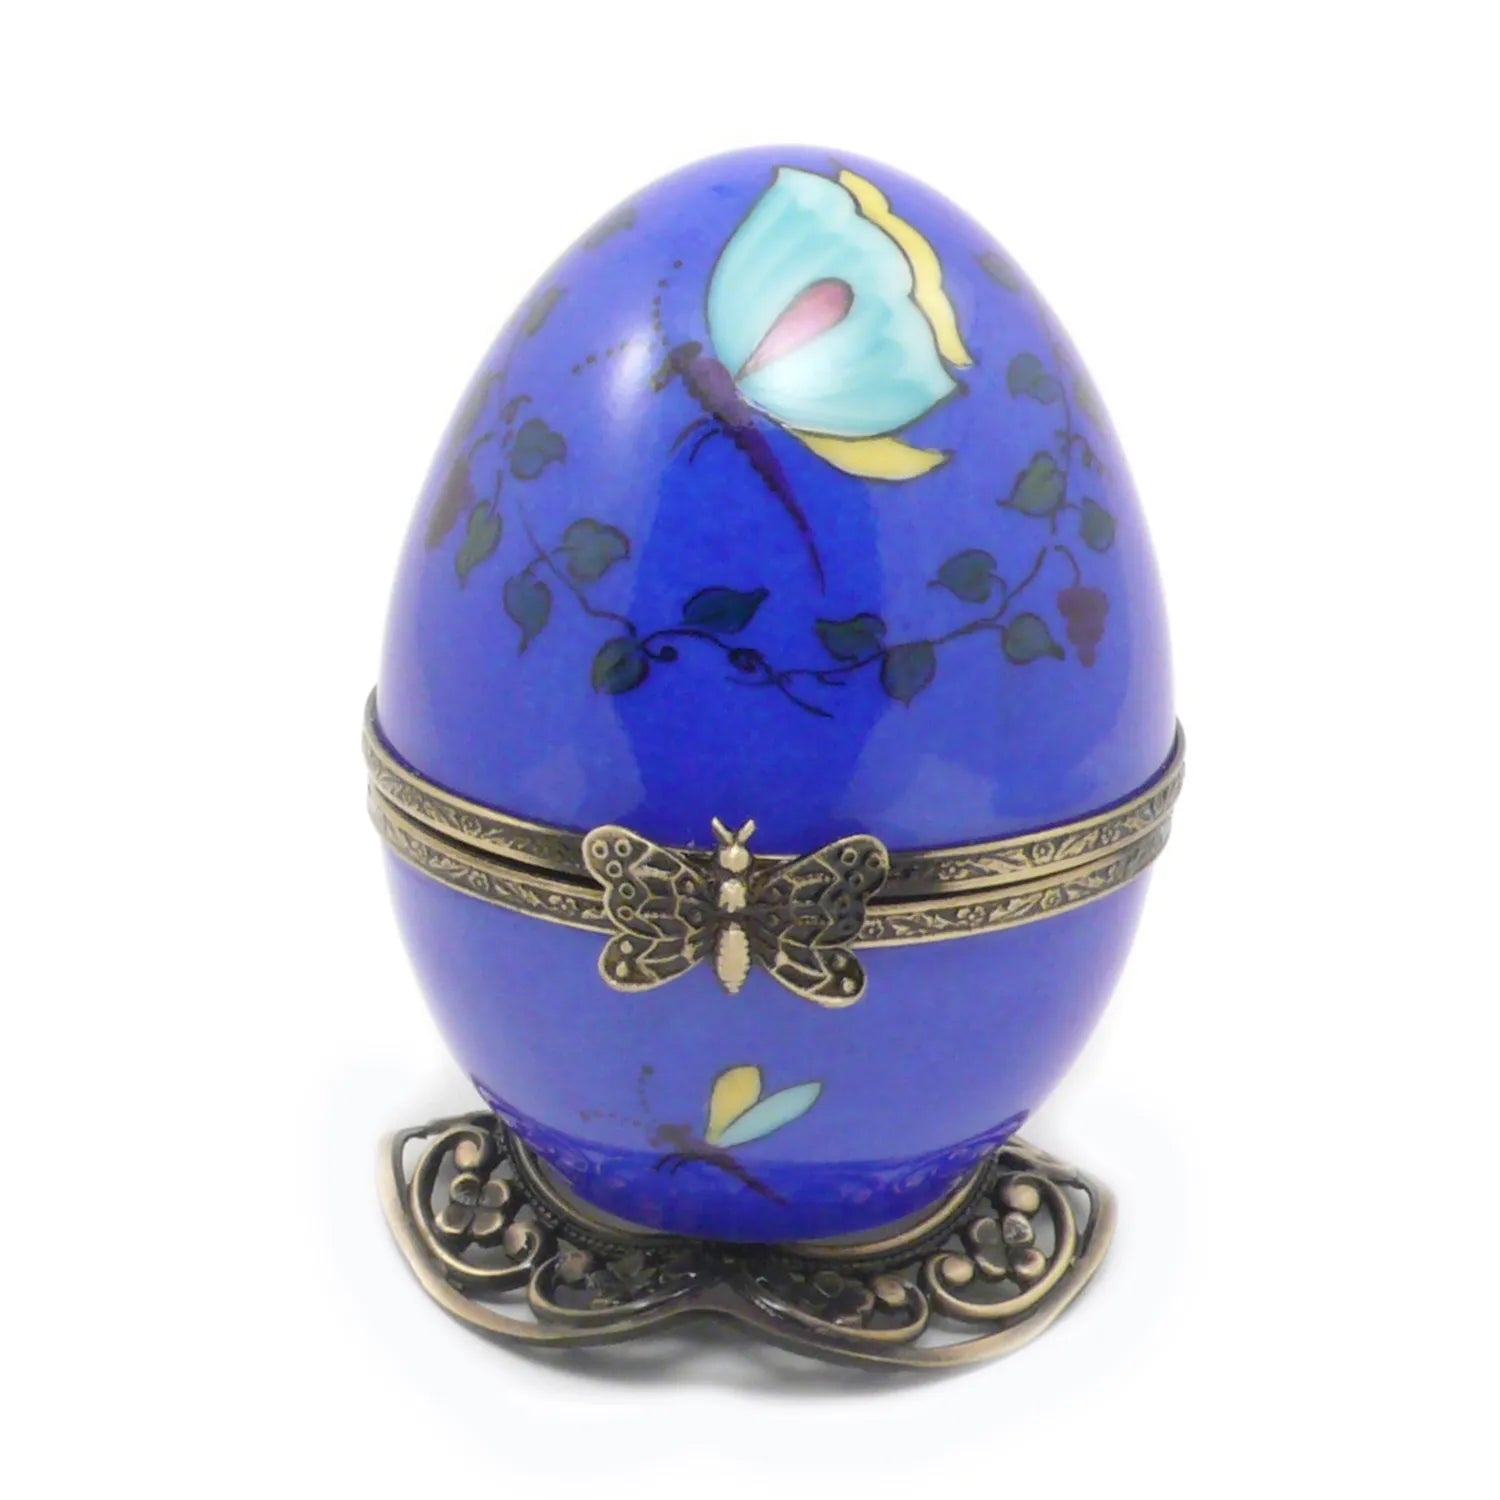 Loud blue musical egg with a little black and white cat - LAZADO